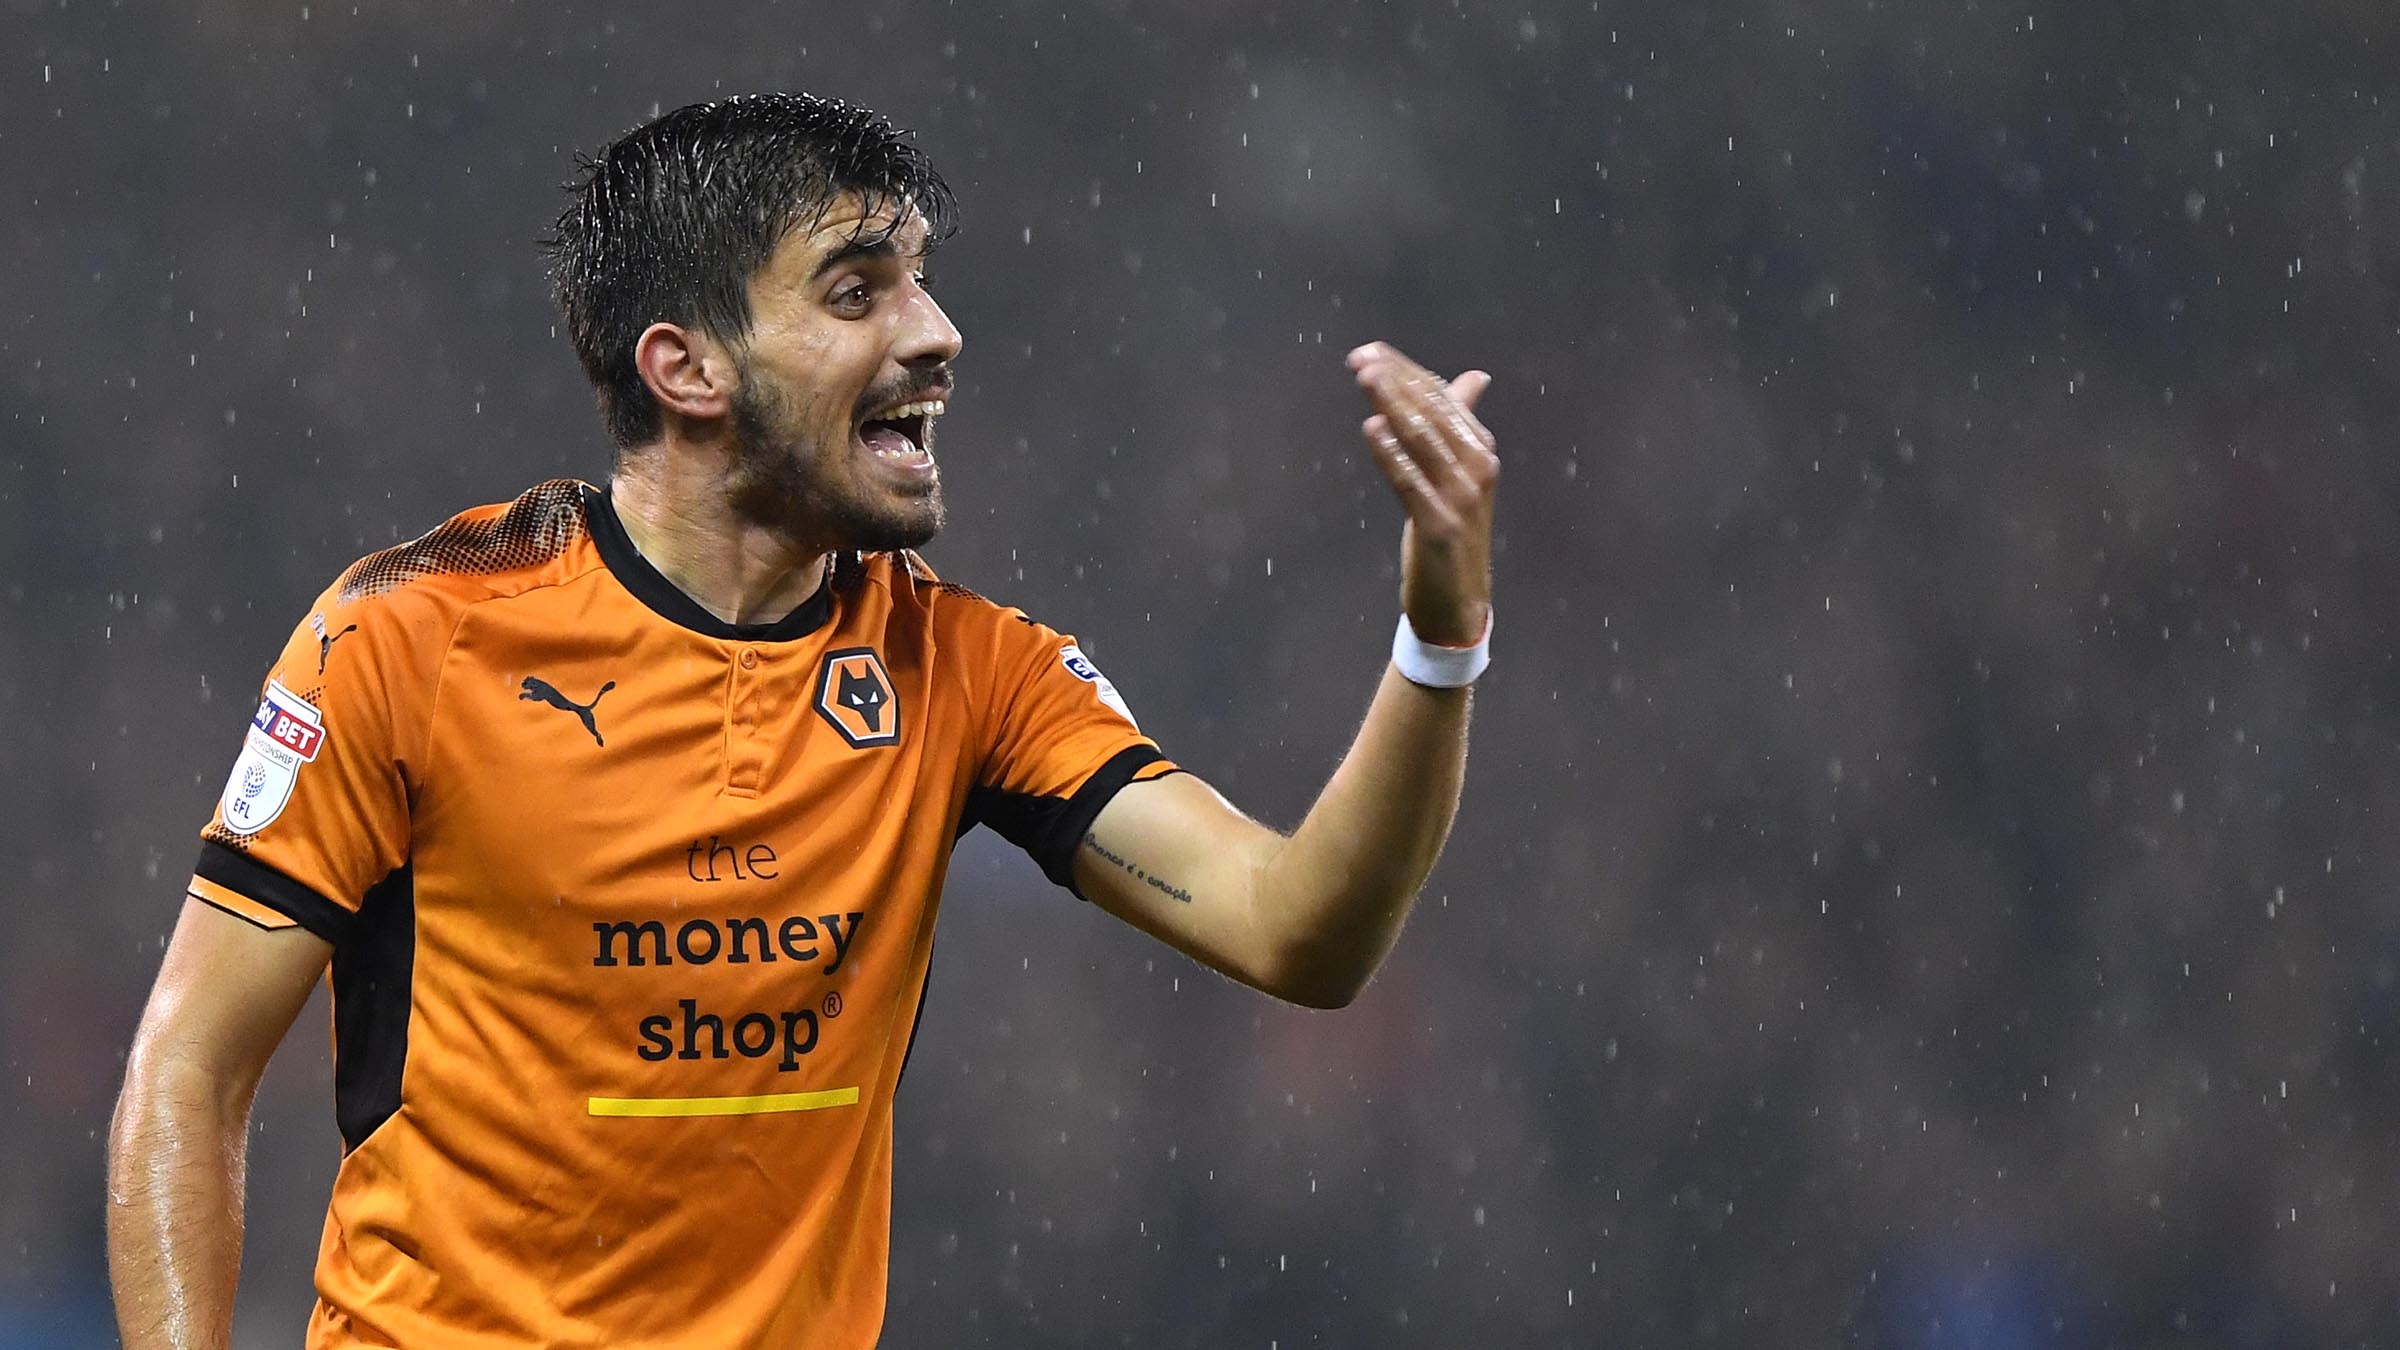 Manchester United are currently in discussions for Wolverhampton Wanderers star Ruben Neves ahead of the 2021/22 season.